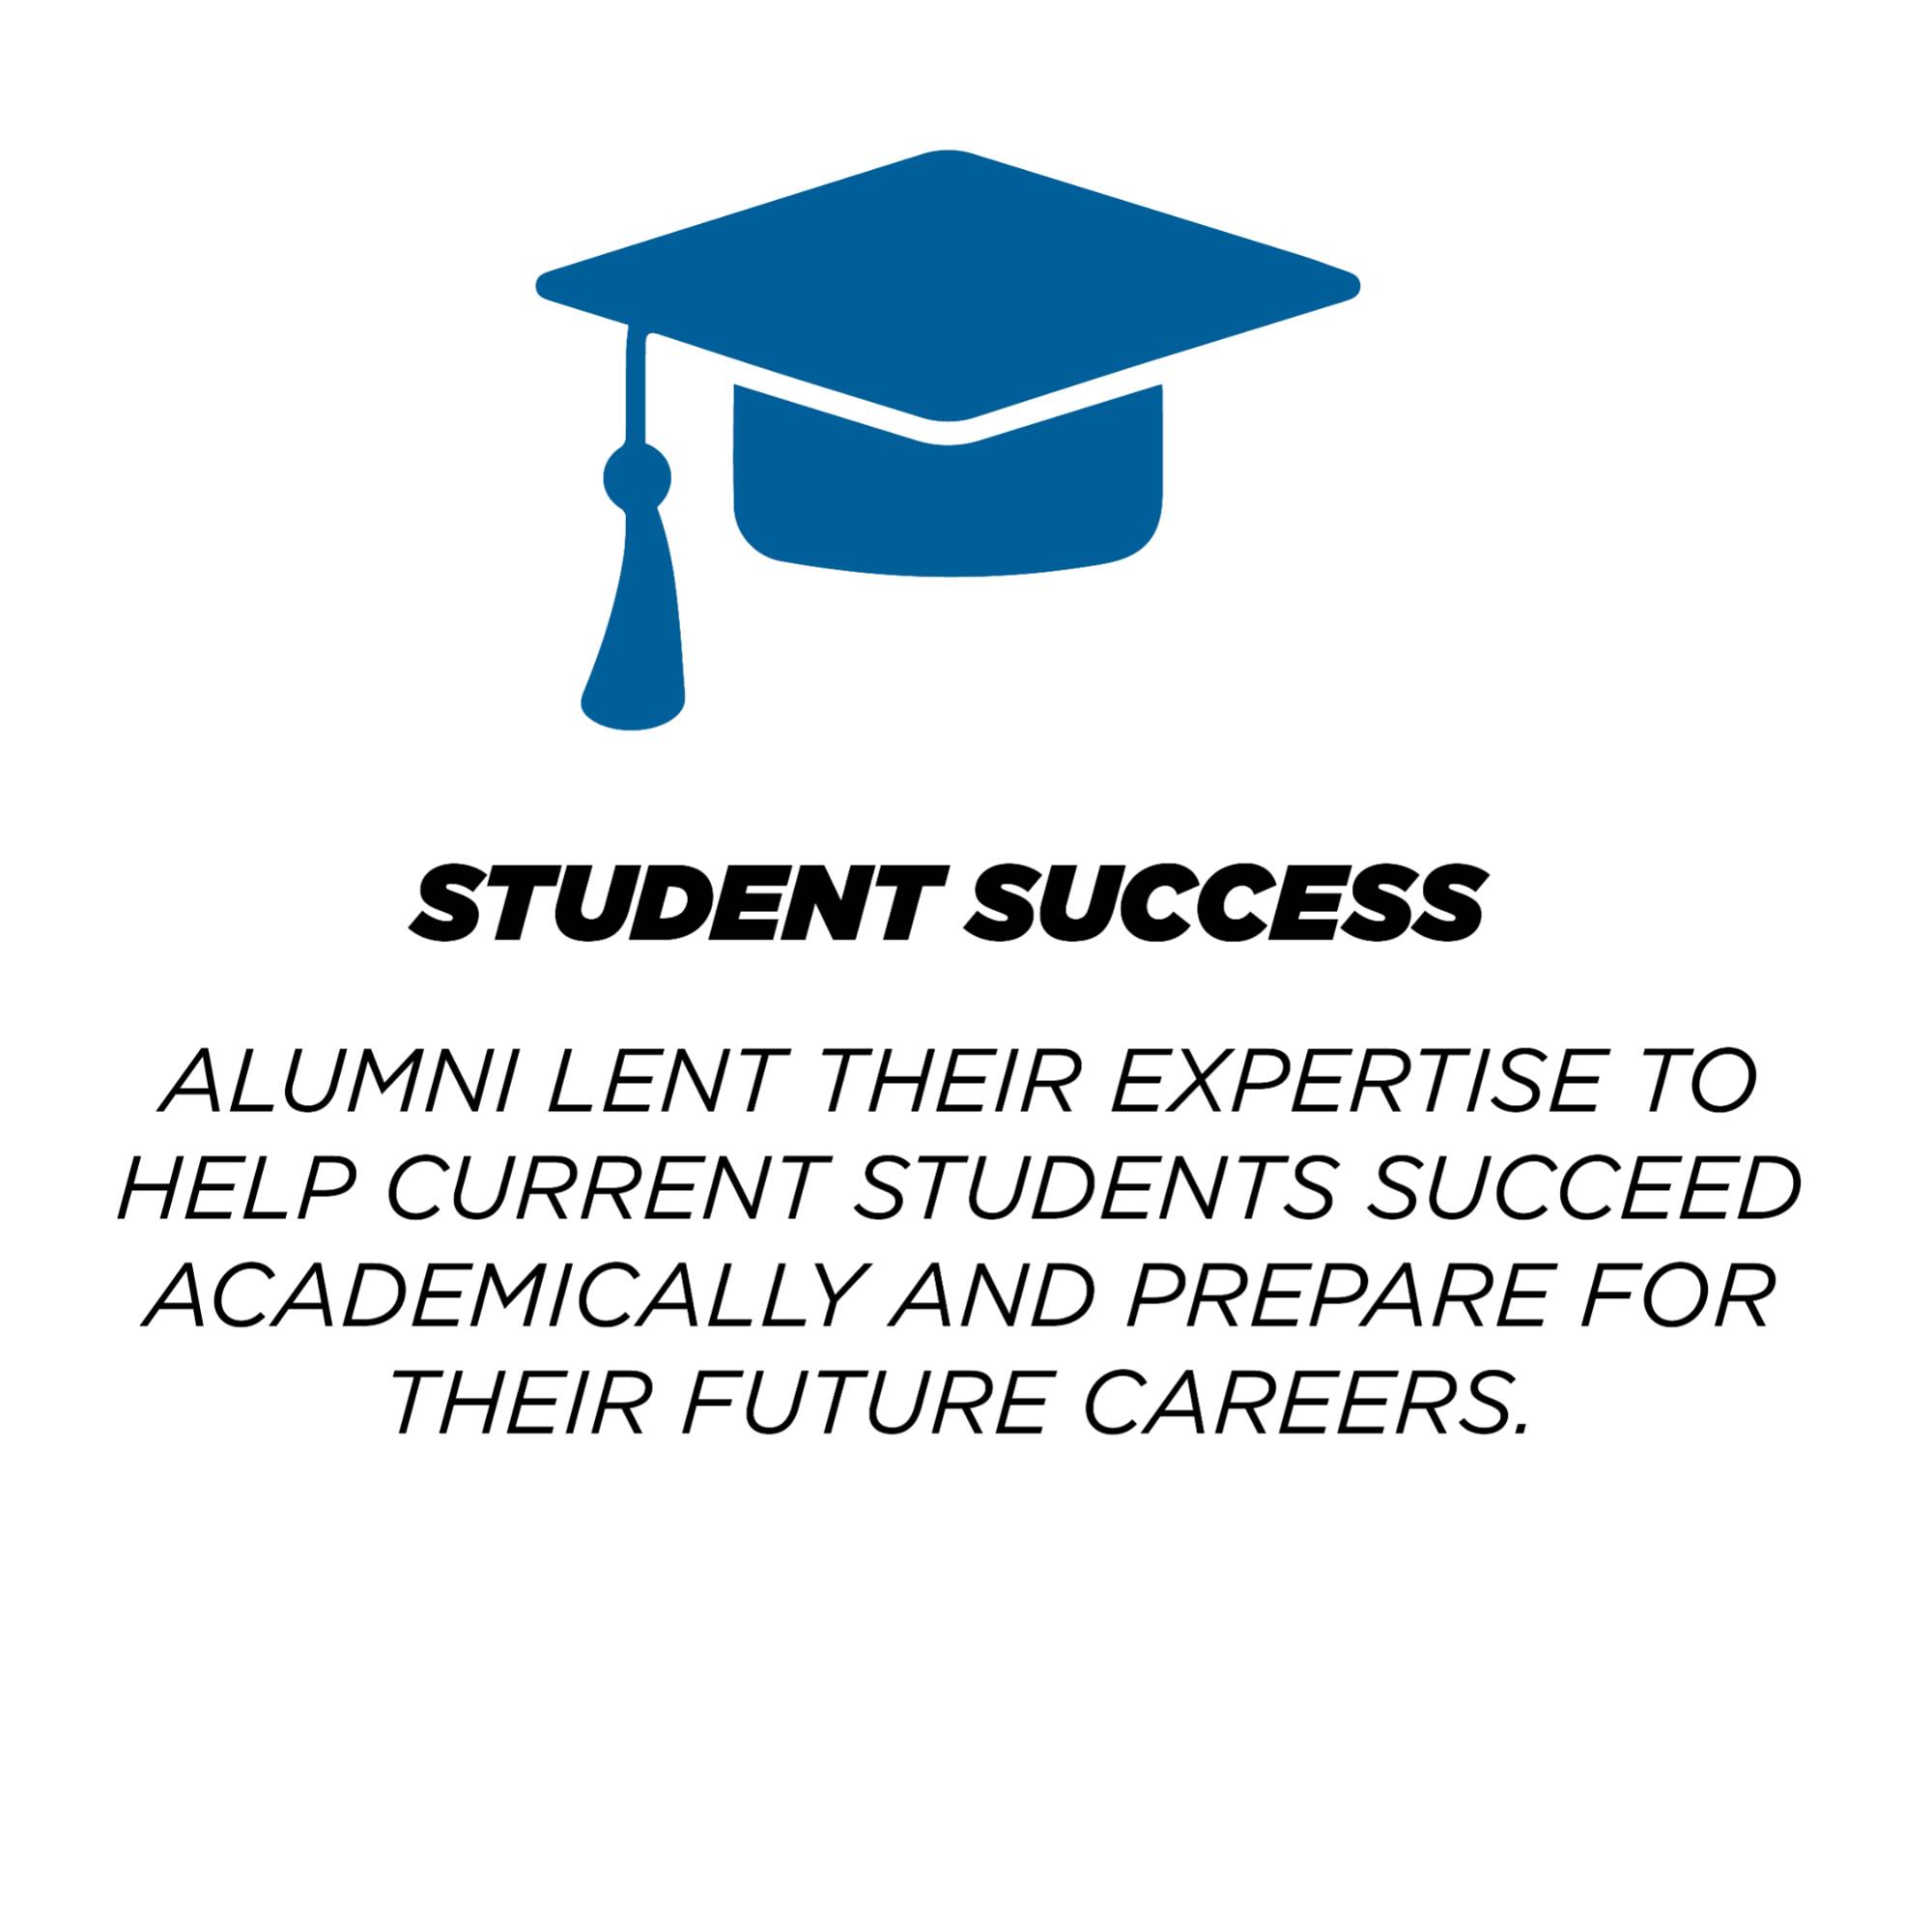 alumni lent their expertise to help current students succeed academically and prepare for their future careers.